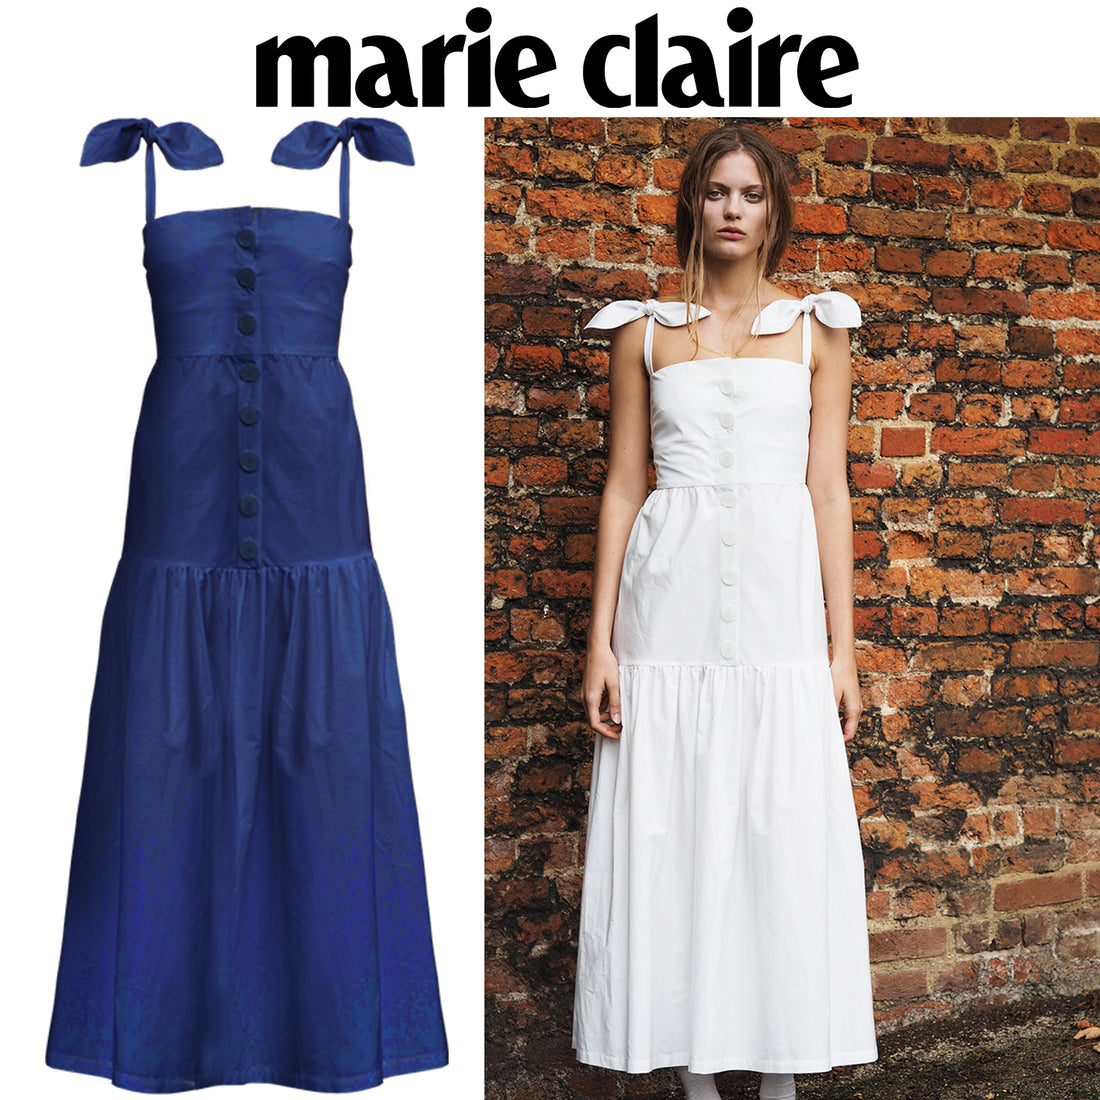 SS18 Primrose Dress featured by Marie Claire UK